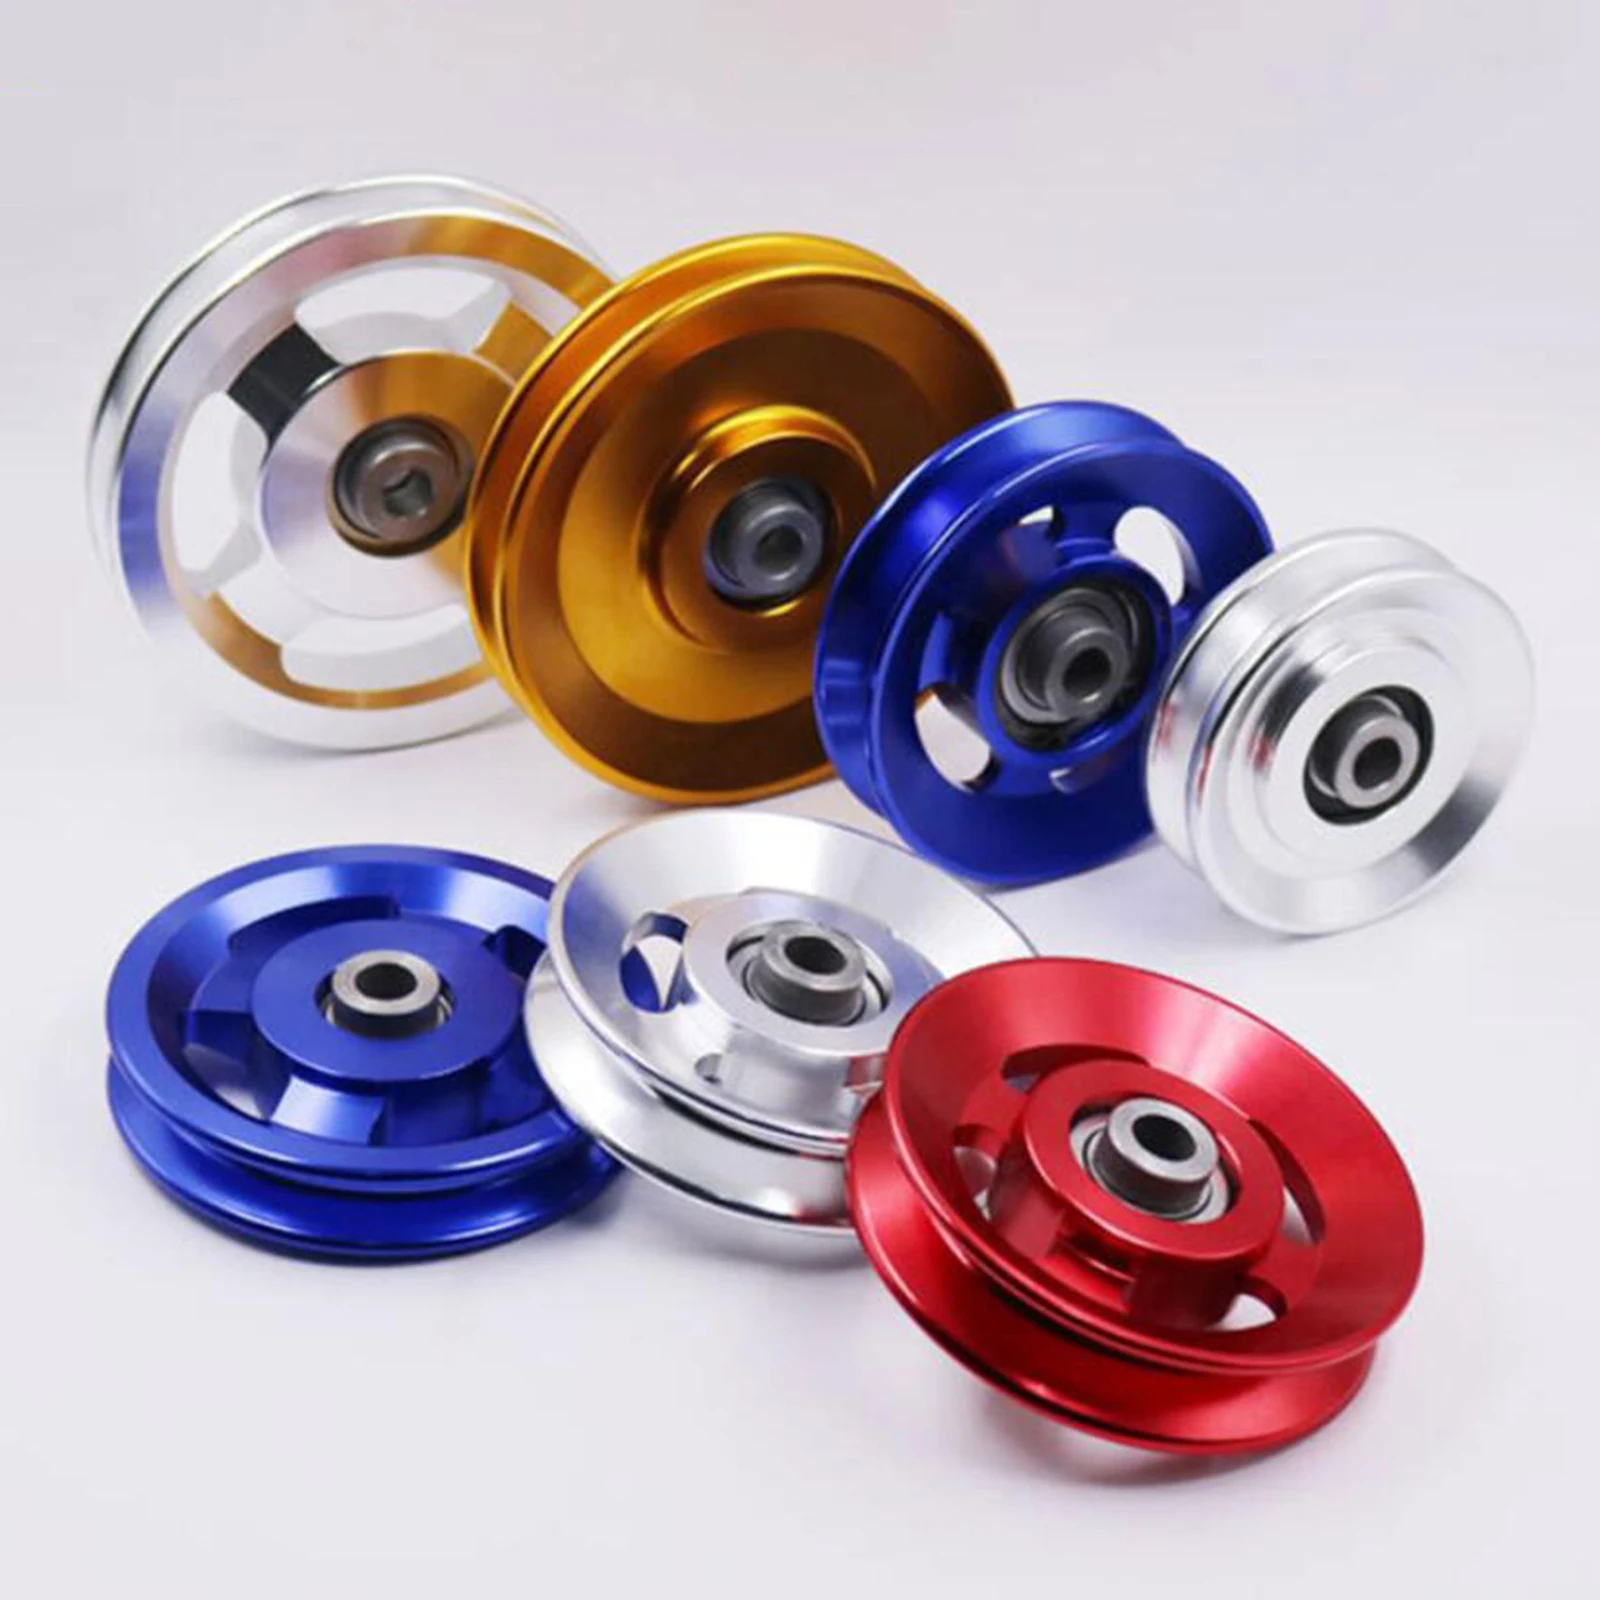 Colcolo Universal Aluminium Alloy Bearing Pulley Wheel Gym Accessory for Fitness Equipment 